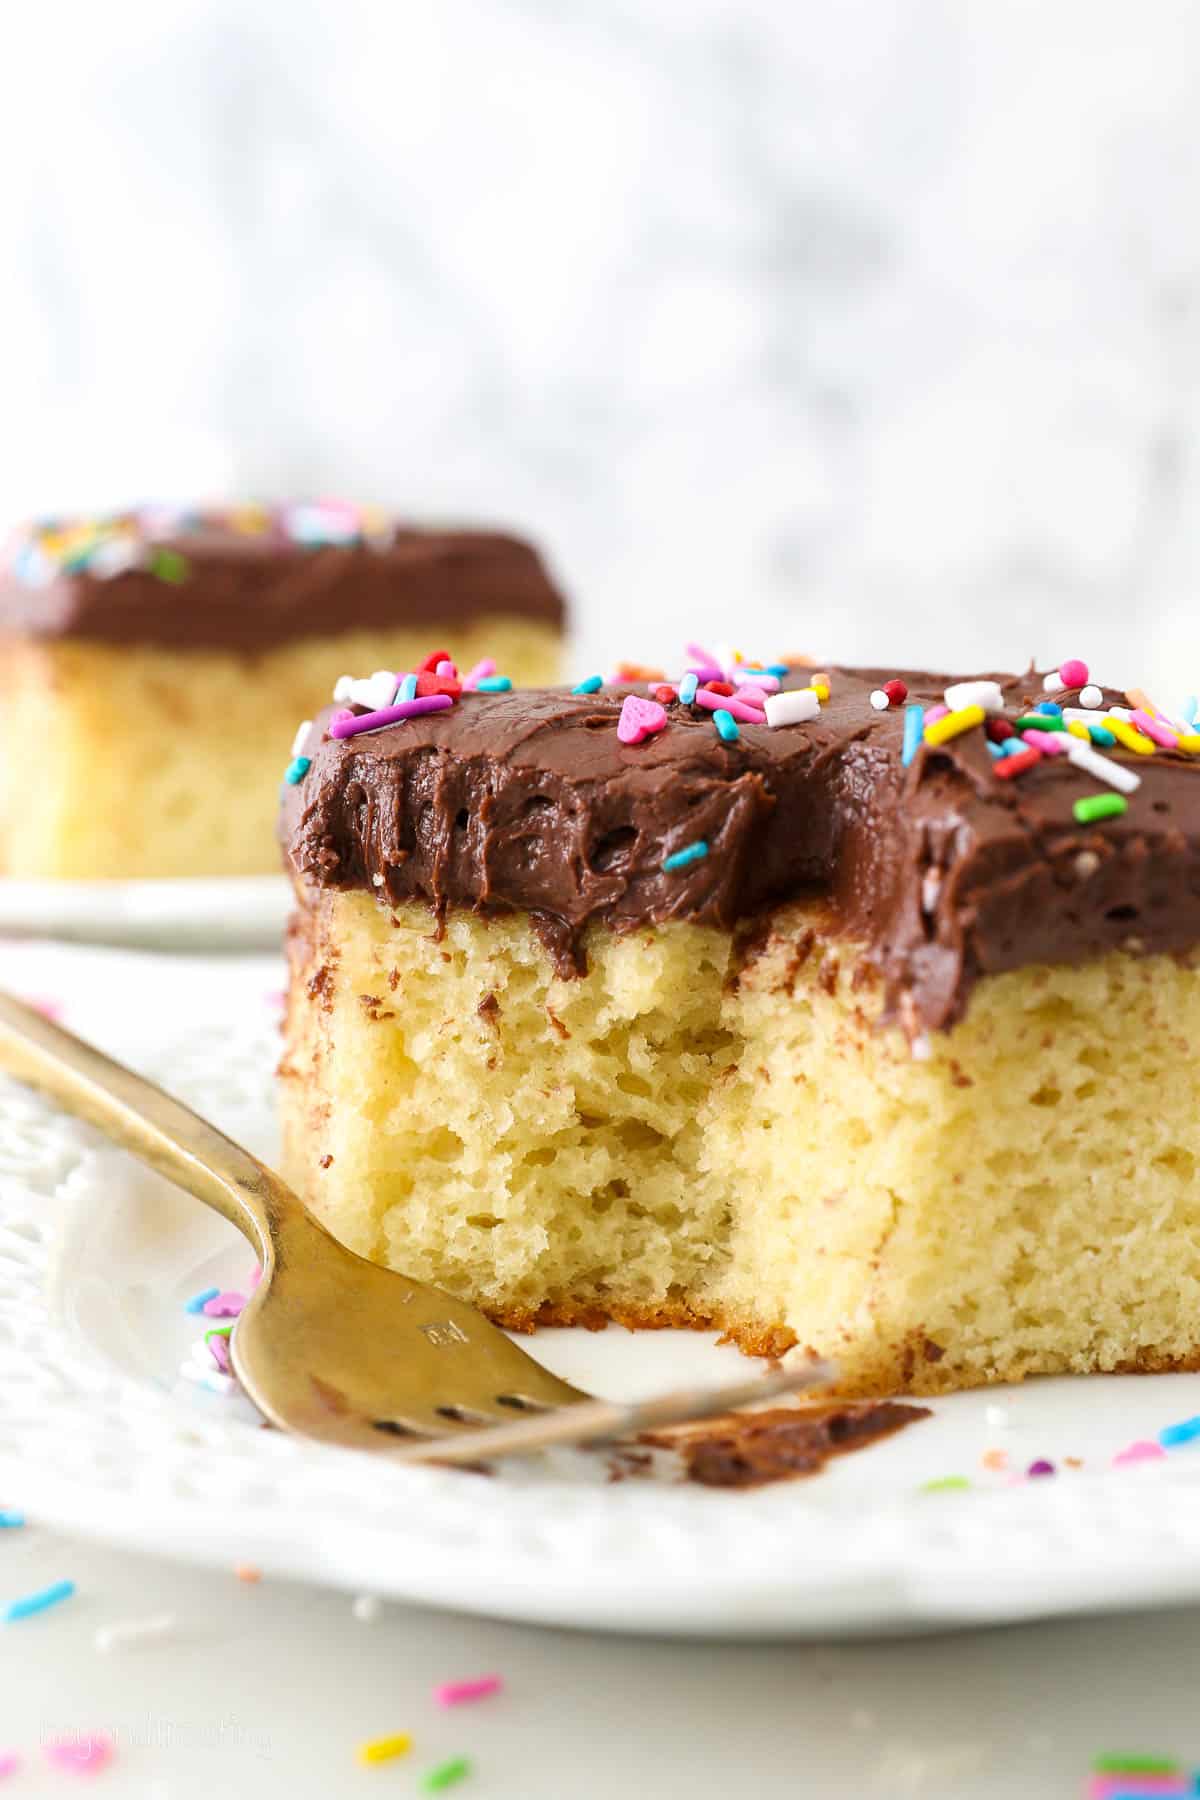 A slice of yellow cake with chocolate frosting and sprinkles on a white plate with a forkful missing.